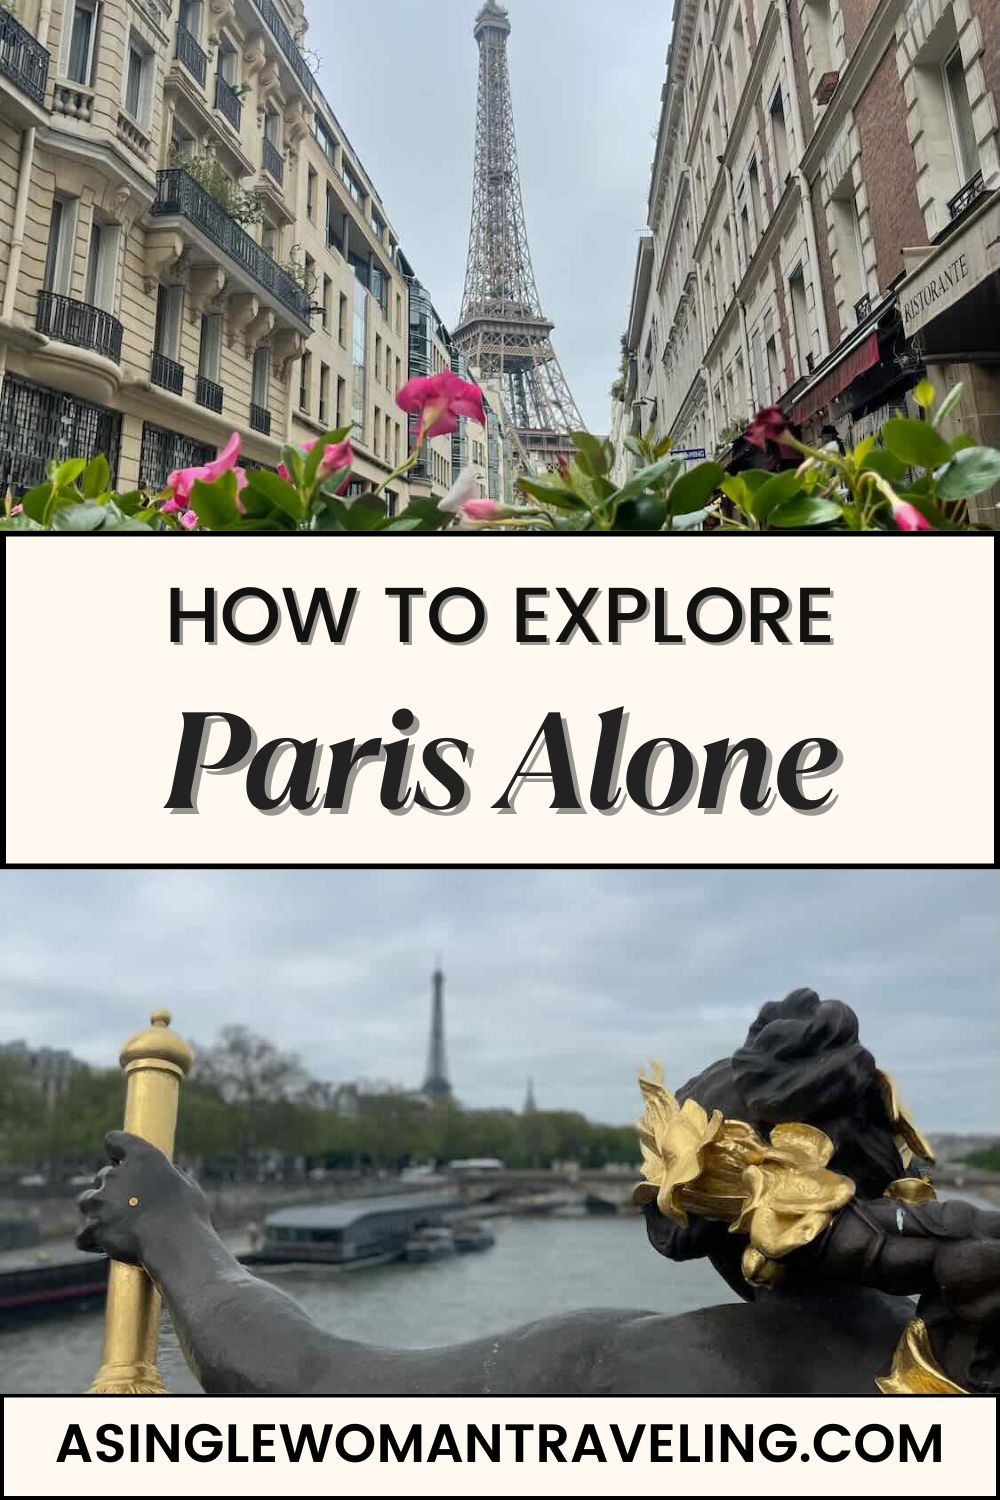 A photo collage titled "HOW TO EXPLORE Paris Alone" featuring the Eiffel Tower viewed from a flower-lined street, and a close-up of a golden sculpture on a bridge overlooking the Seine river. The images emphasize the beauty and romance of Paris, perfect for solo travelers. The website "ASINGLEWOMANTRAVELING.COM" is also included in the text overlay.